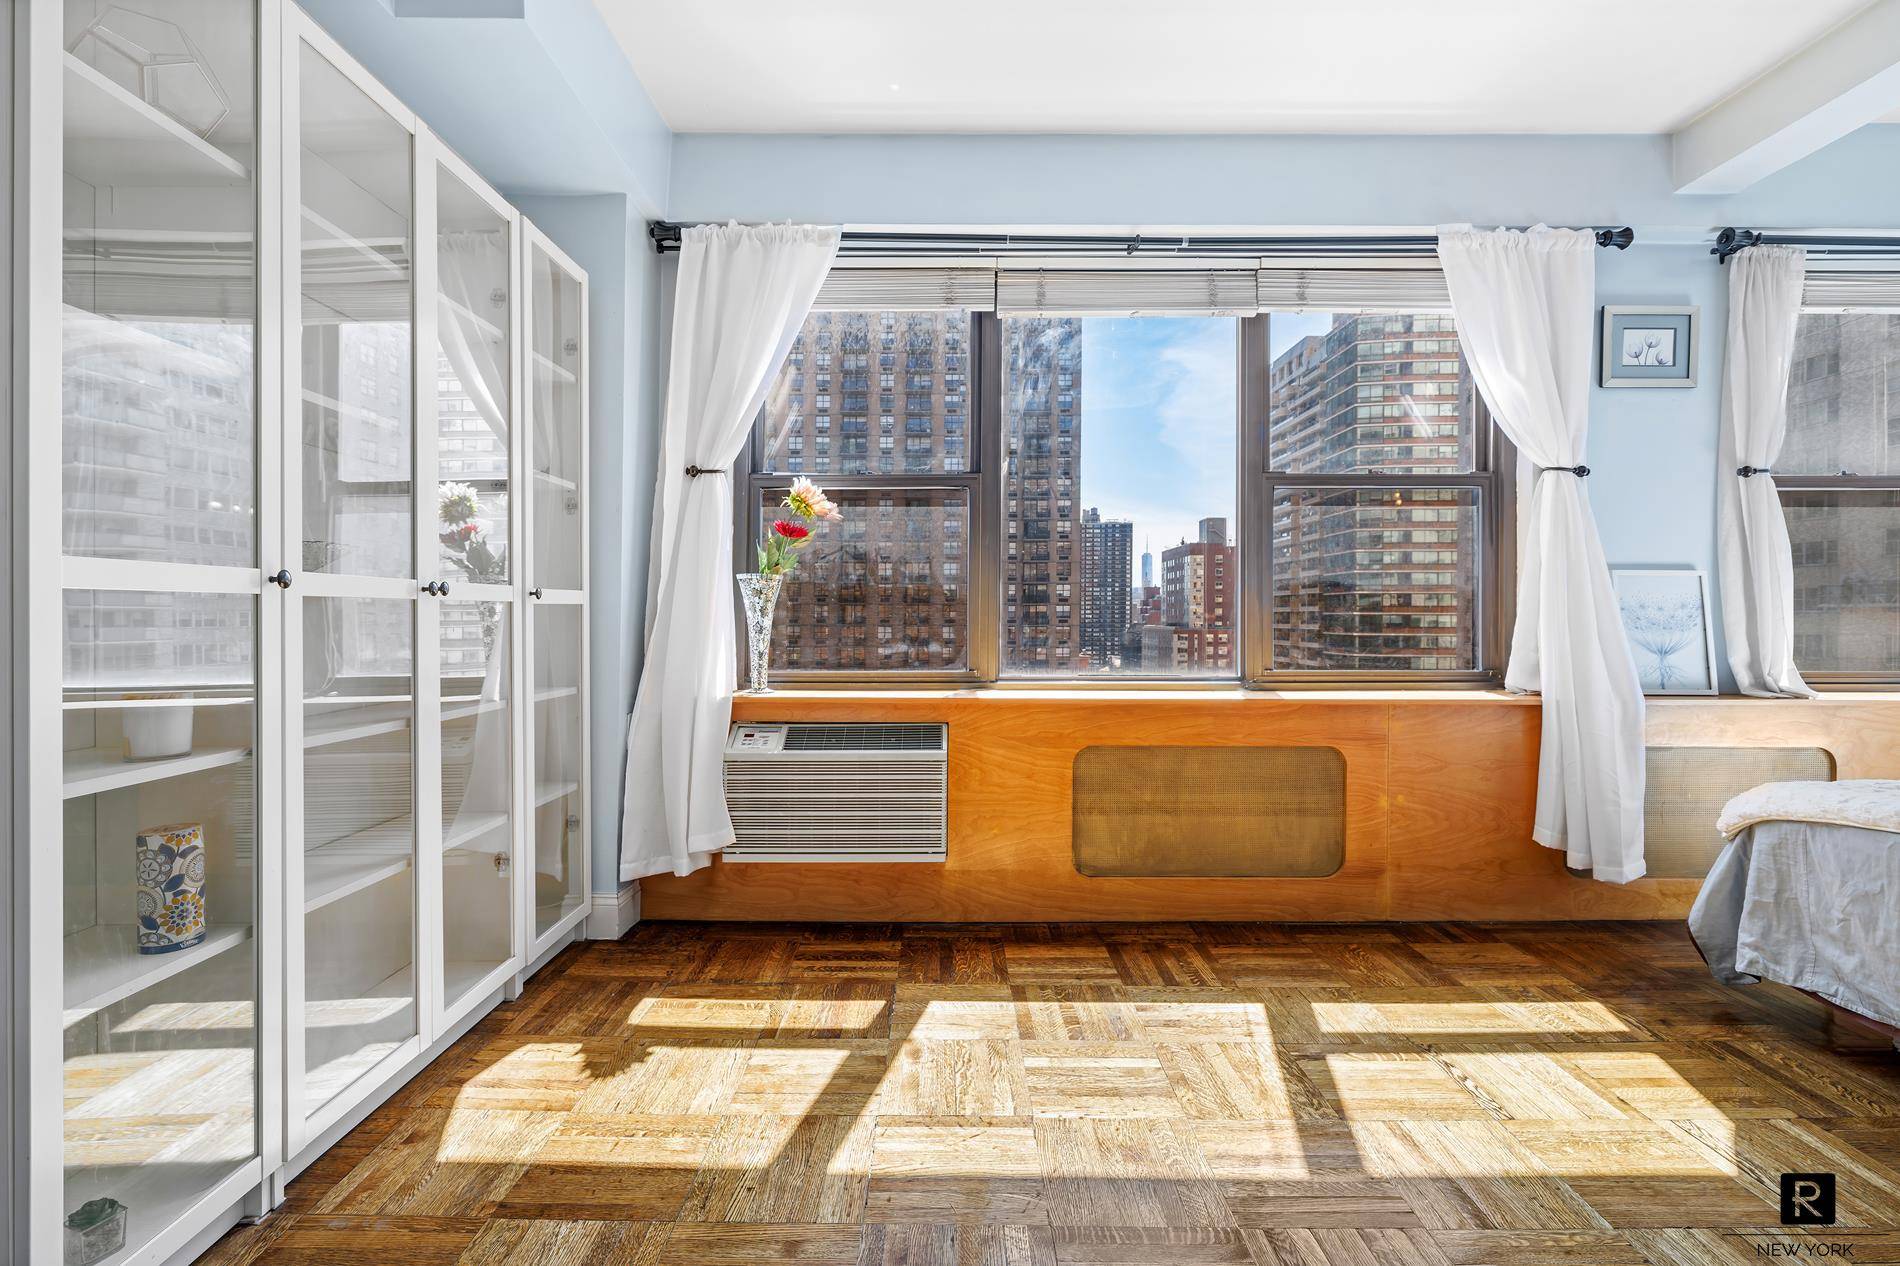 Sunny amp ; south facing alcove studio with stunning city views, including World Trade Center views !